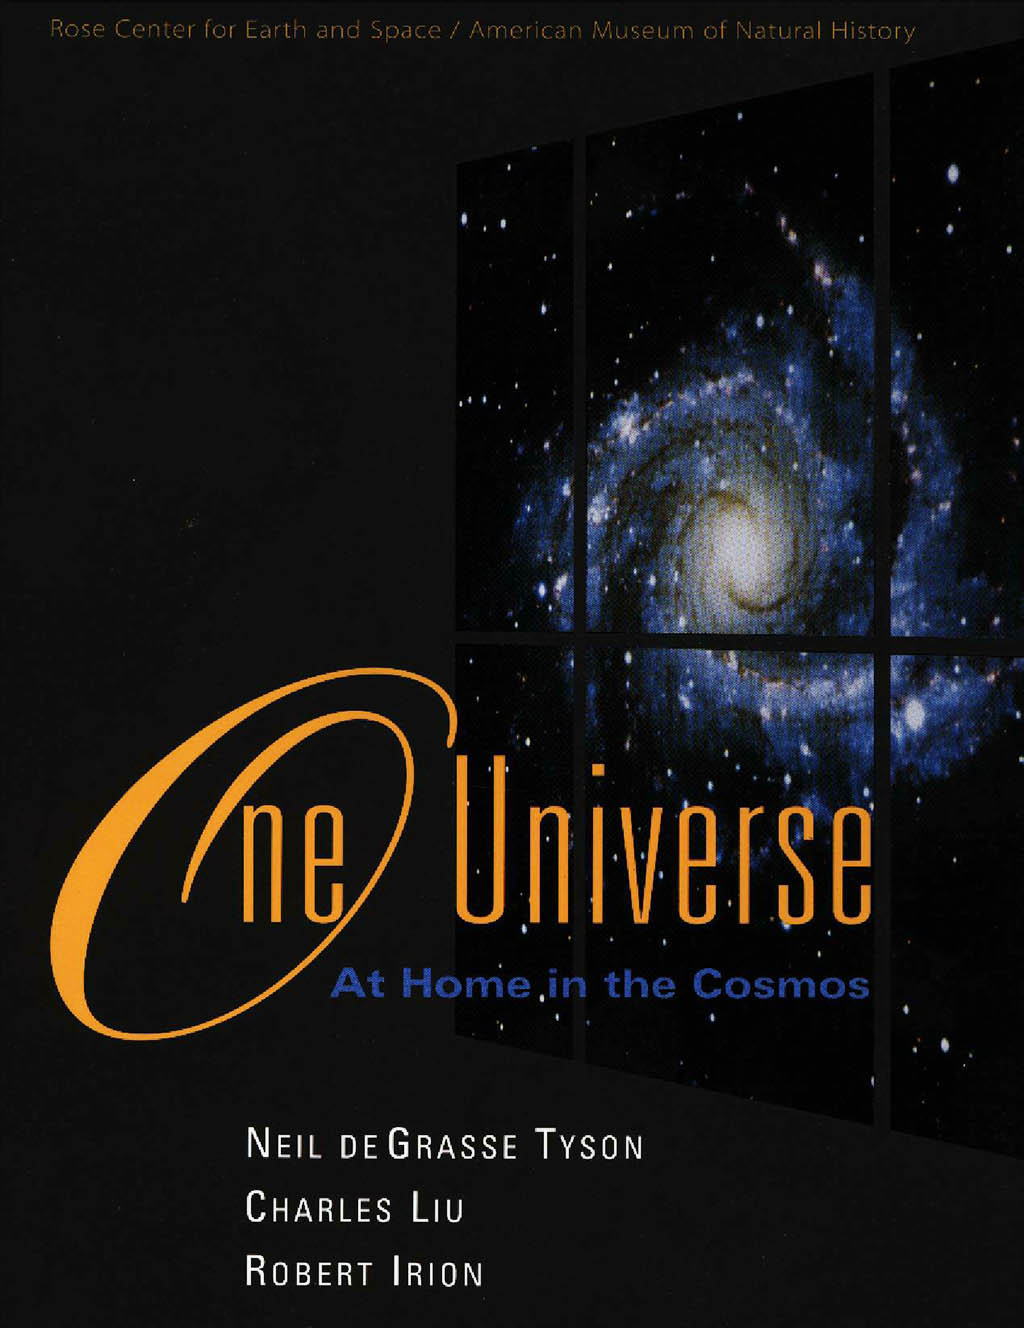 Link to the book One Universe by Neil deGrasse Tyson, Charles Liu, and Robert Irion.